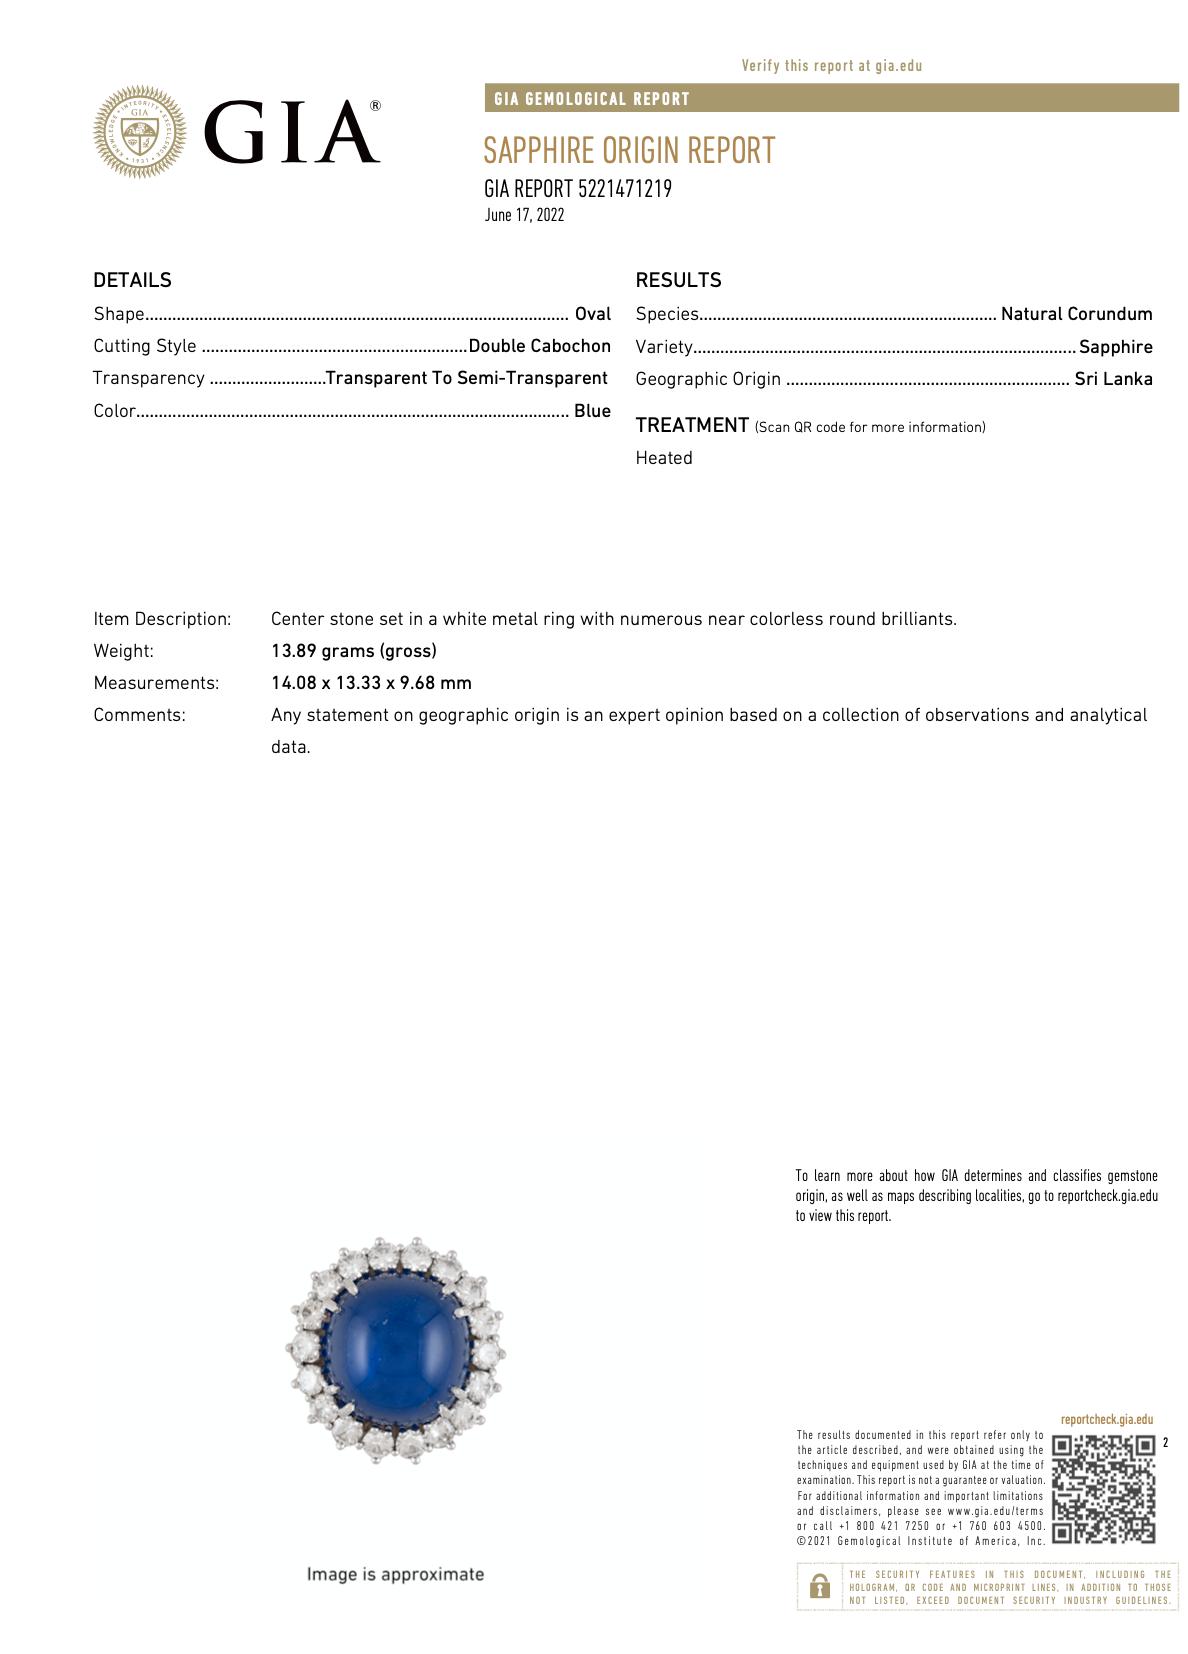 GIA Certified 25 Carat Cabochon Blue Sapphire & Diamond Halo Ring in Platinum-Sapphire ring-ASSAY